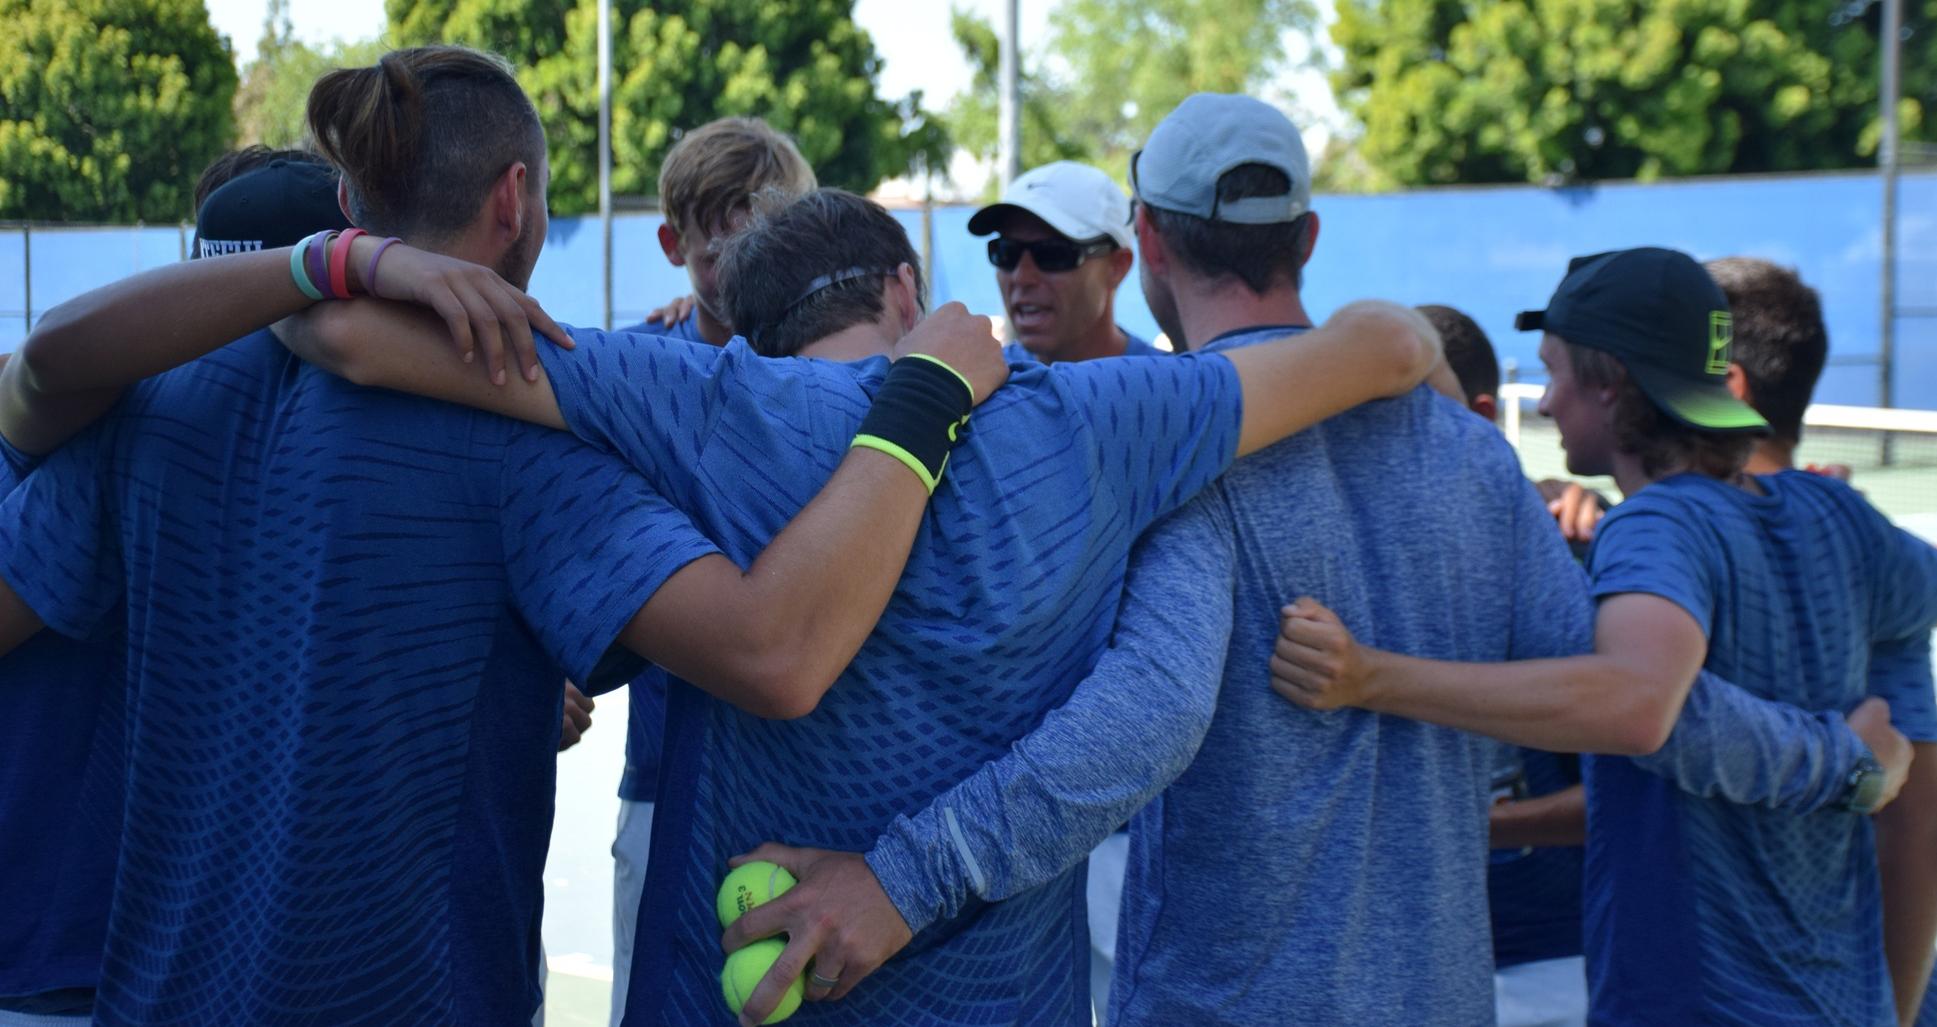 Men's tennis team going after its third straight state title